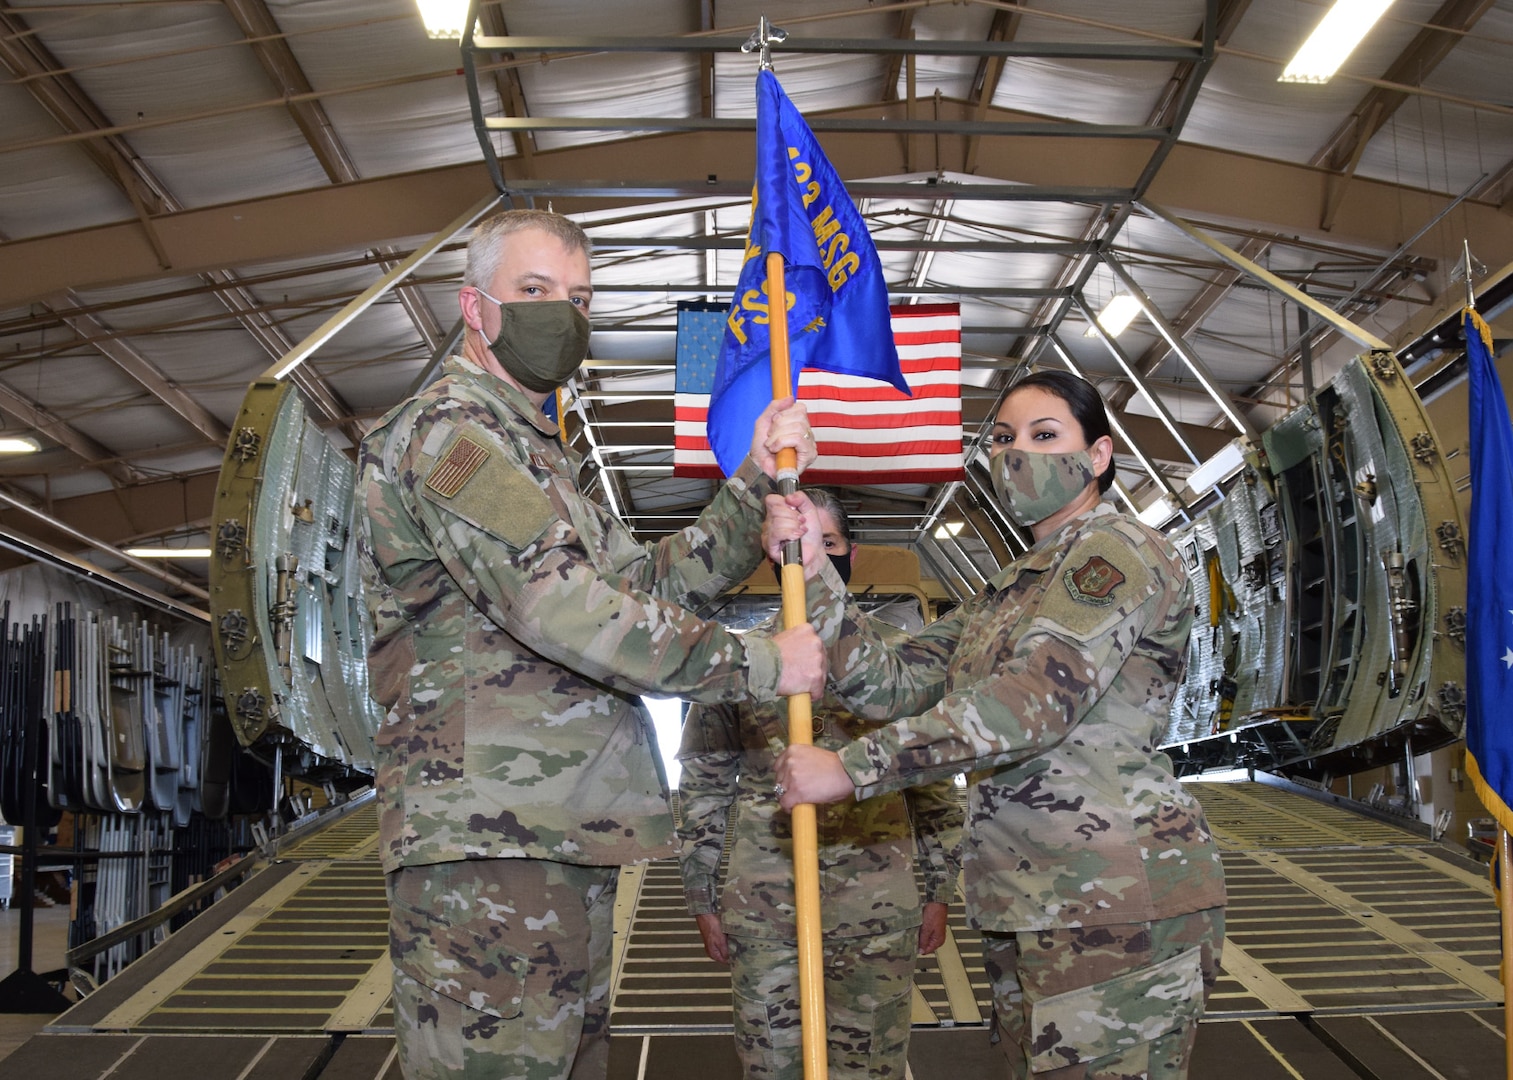 Col. Wayne M. Williams, 433rd Mission Support Group commander, presents the 433rd Force Support Squadron guidon to Maj. Thanya A. Martinez, during a change of command ceremony Oct. 4, 2020 at Joint Base San Antonio-Lackland, Texas.